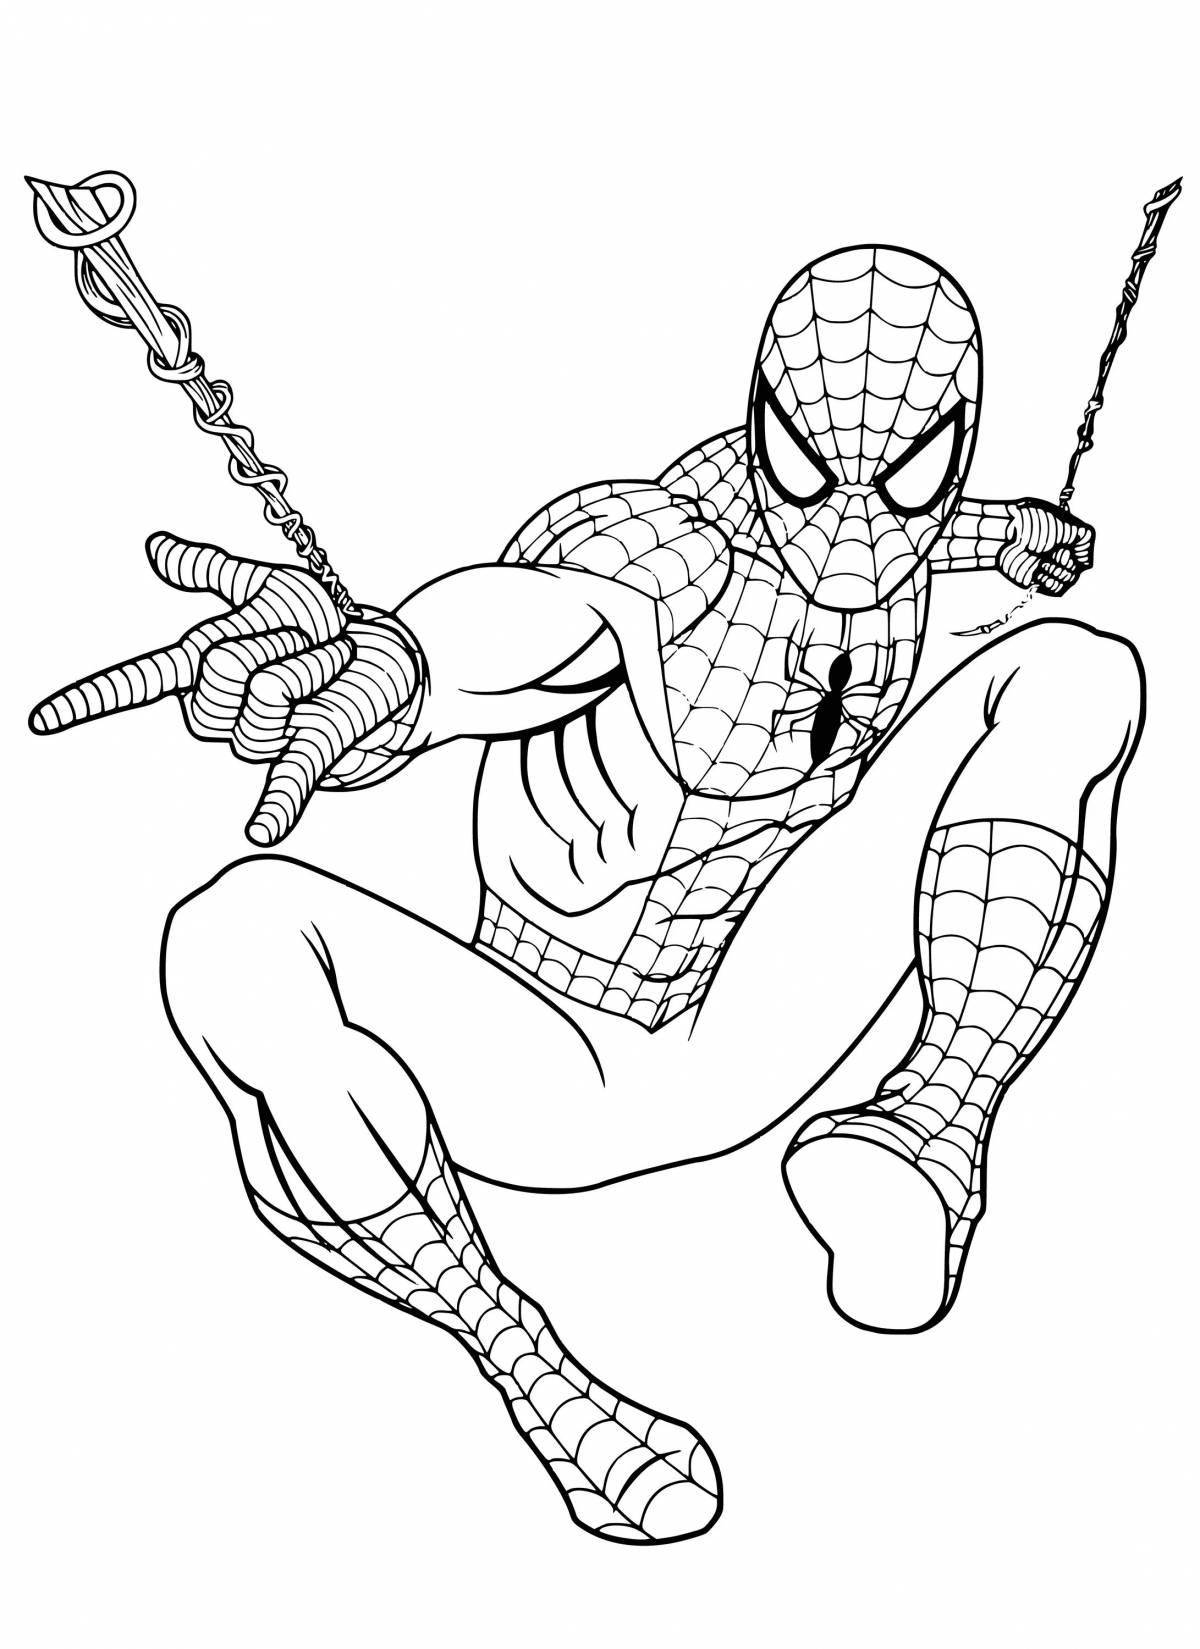 Great marvel heroes coloring book for kids